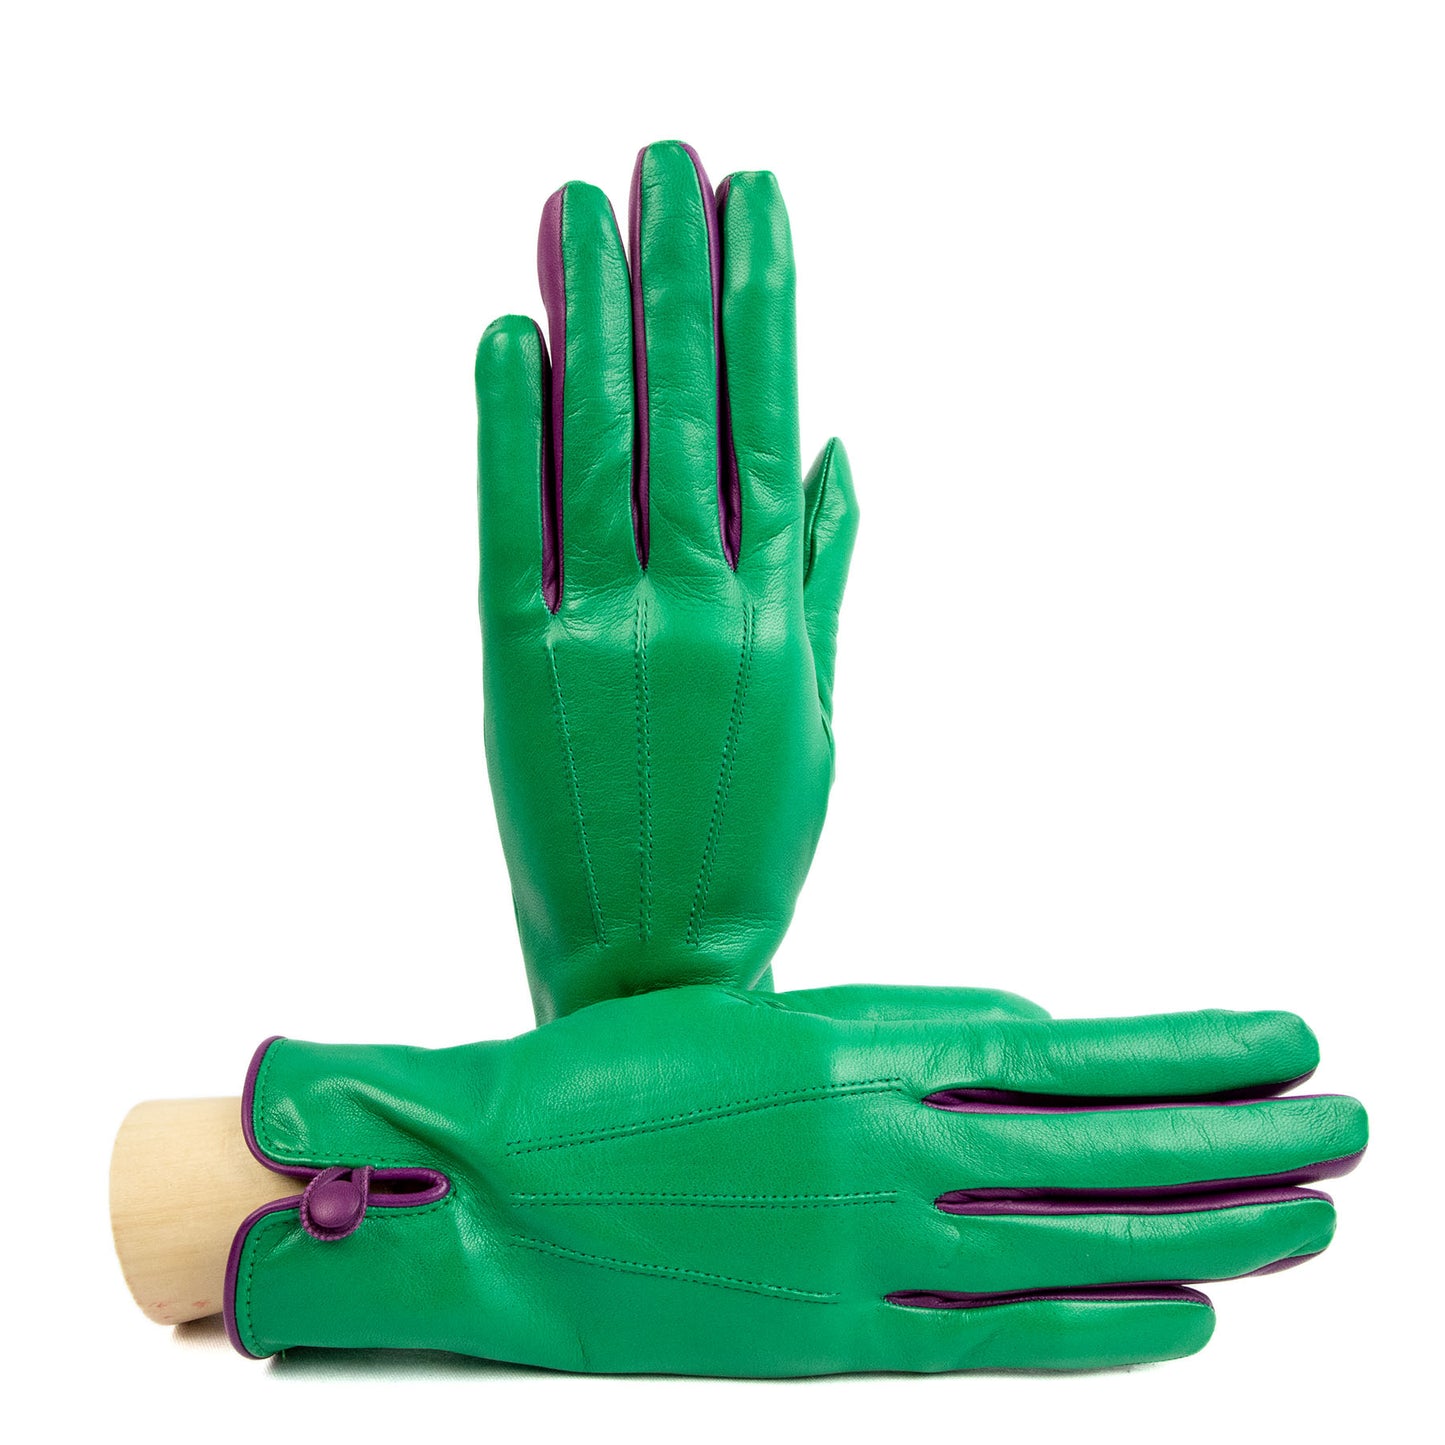 Women's grass nappa leather gloves with button and cashmere lining